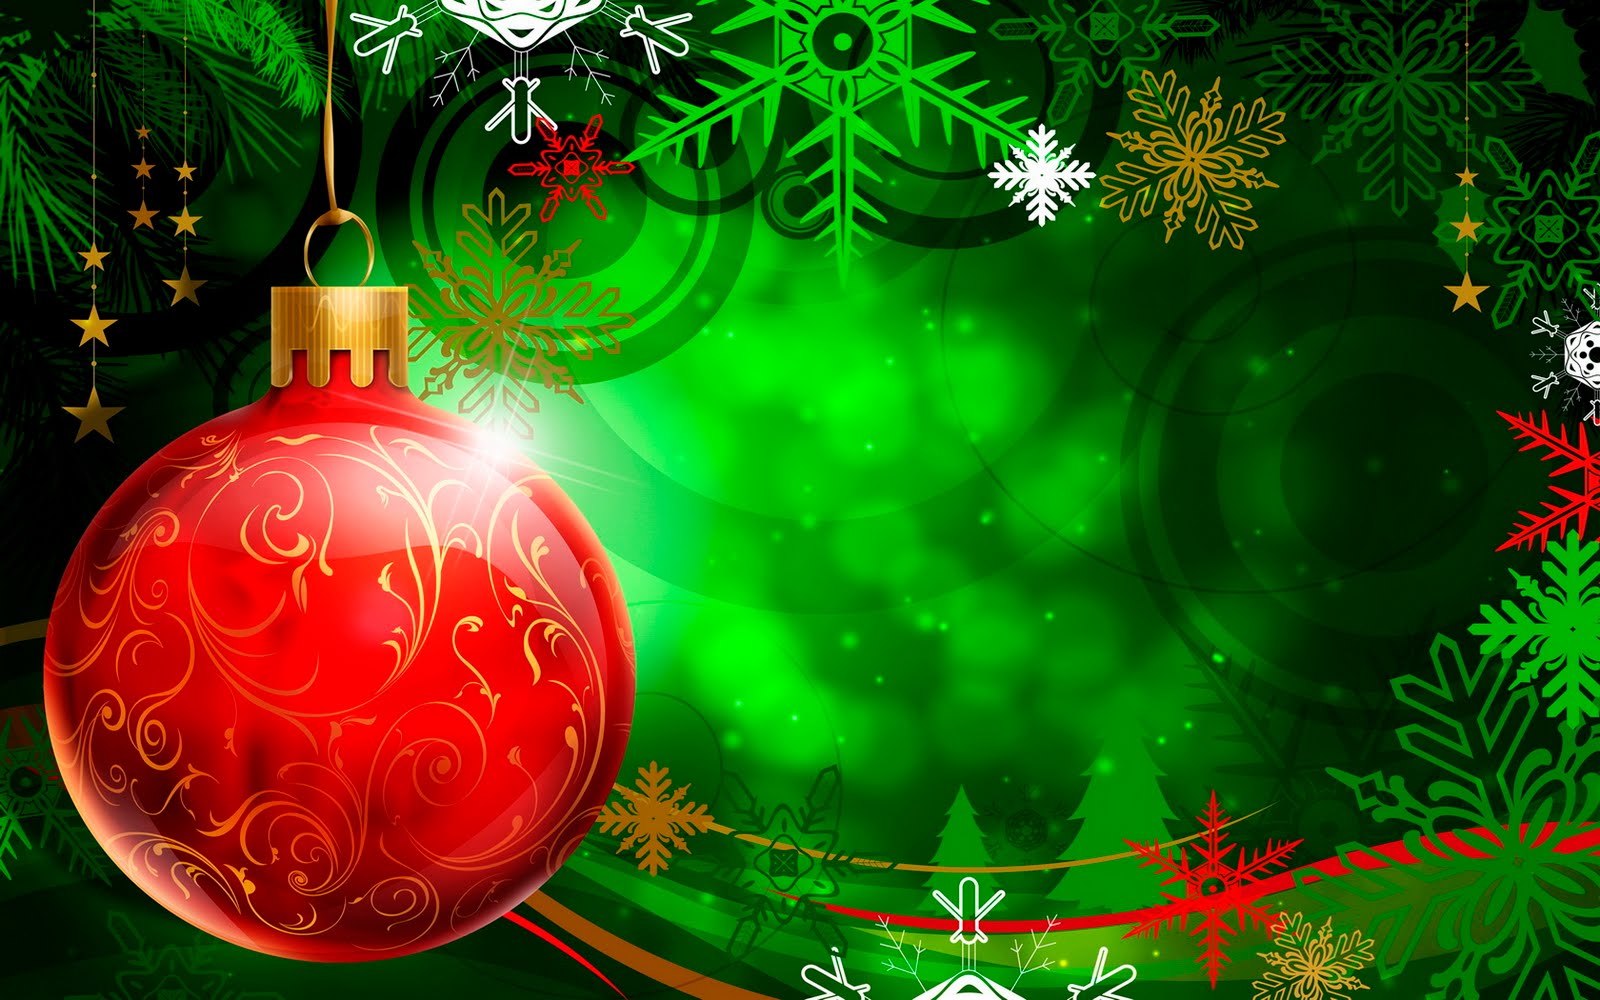 High Definition Photo And Wallpapers: free christmas 